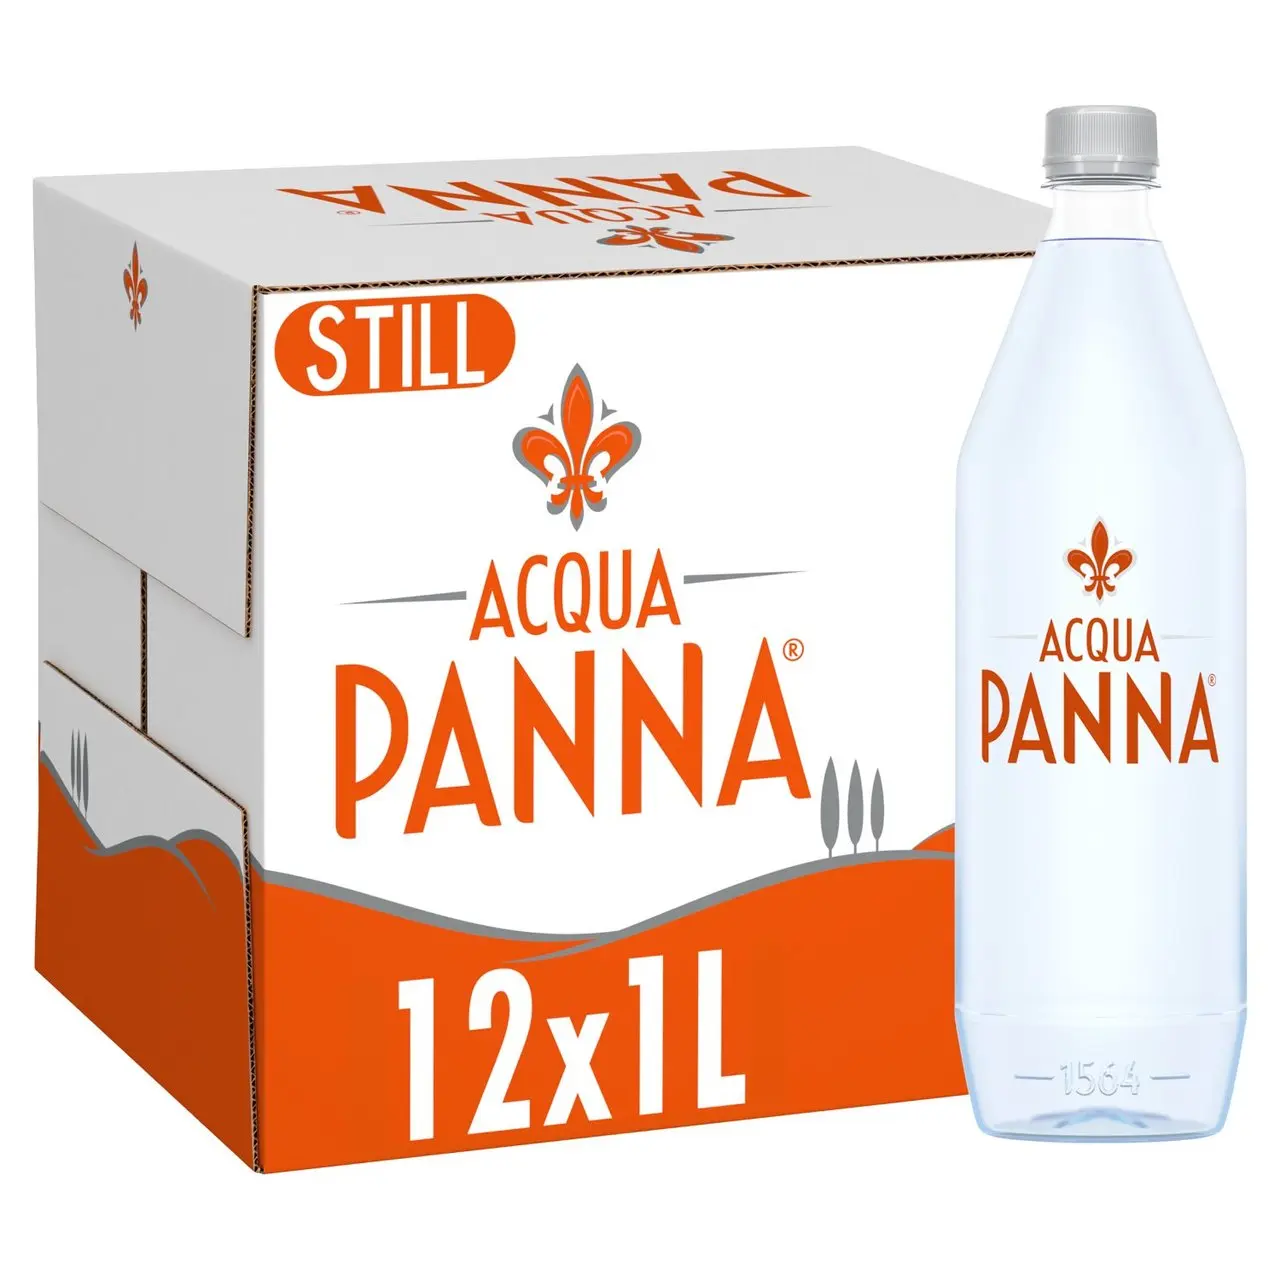 Acqua Panna Still Mineral Water Ready For Export Buy Water Level Sensor For Arduino Water Sprinkler For Kids Distilled Water For Laboratory Use Product On Alibaba Com